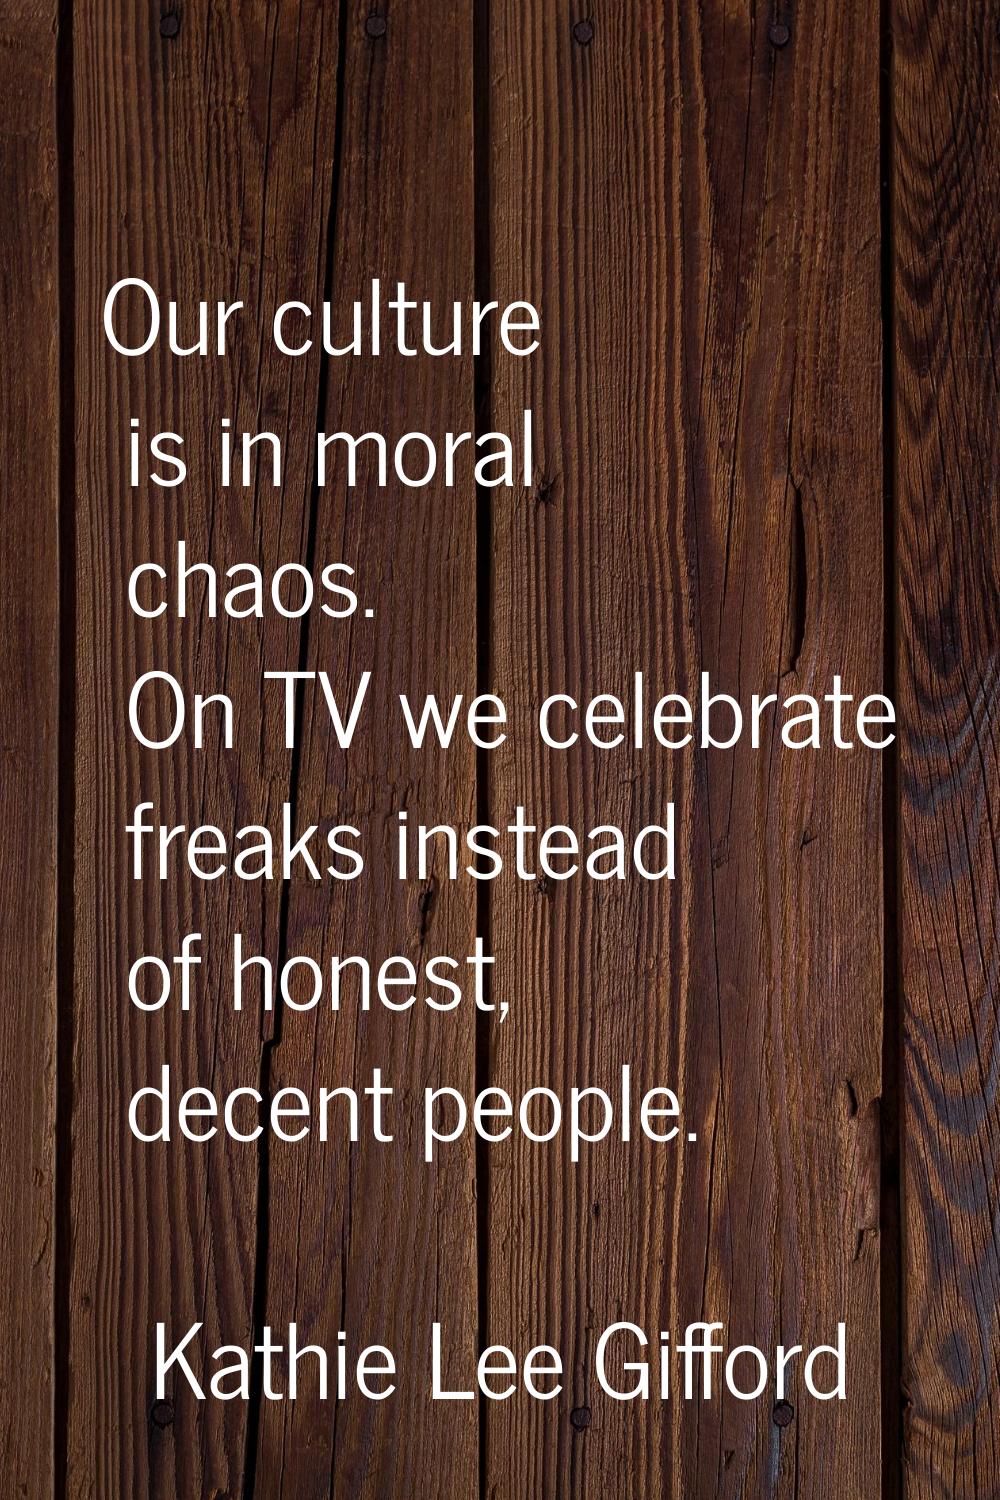 Our culture is in moral chaos. On TV we celebrate freaks instead of honest, decent people.